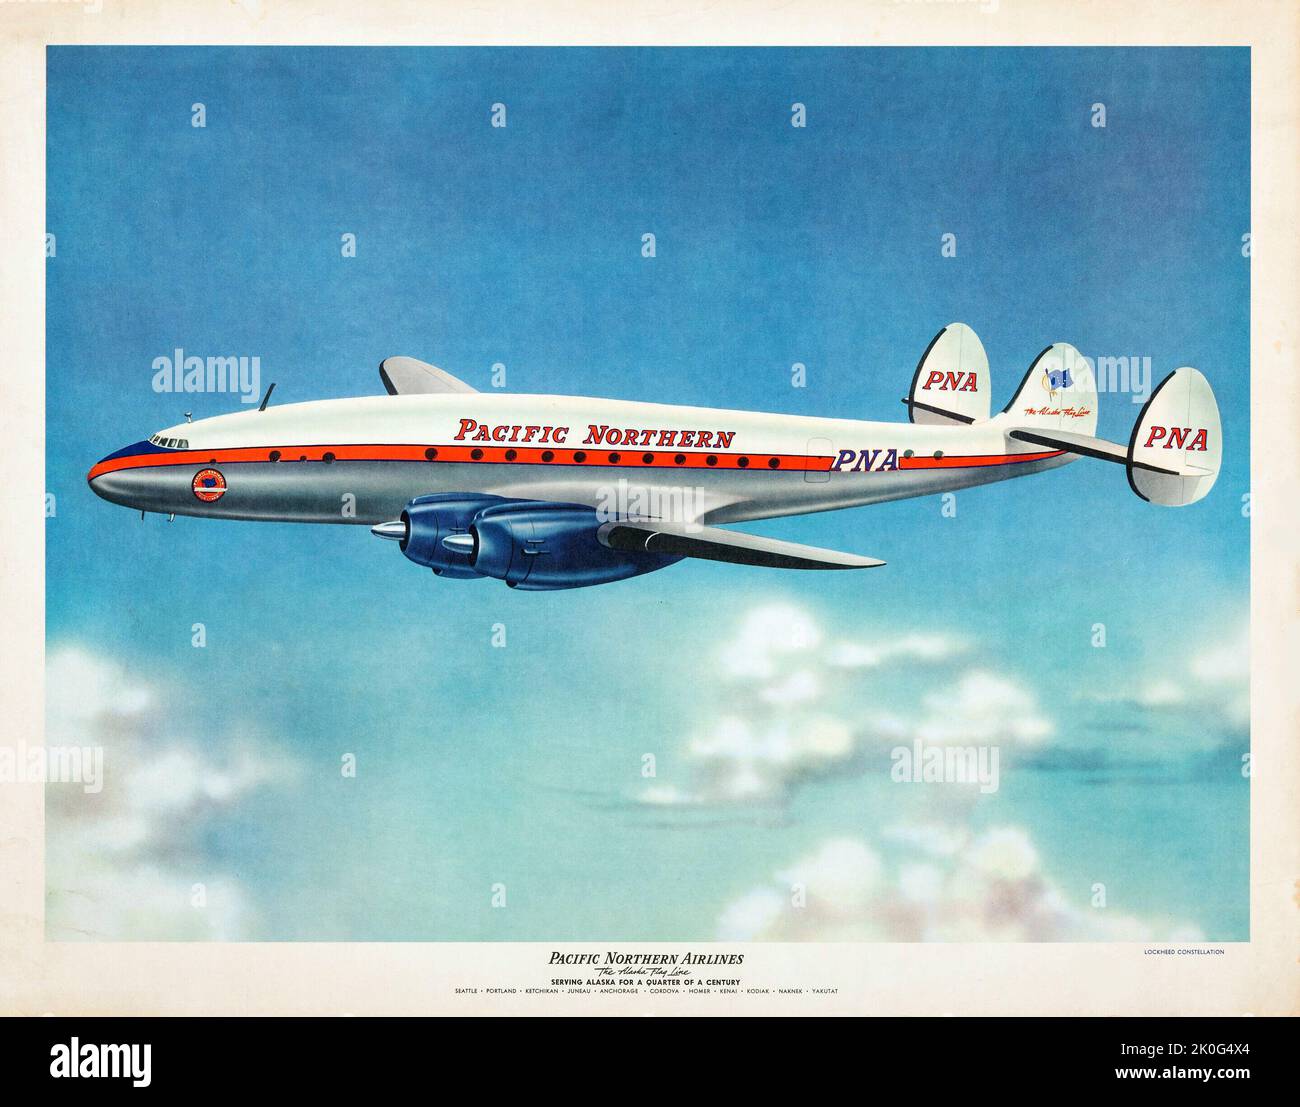 Poster der Fluggesellschaft - Pacific Northern Airlines - The Alaska Flag Line (Pacific Northern Airlines, c 1960s). Reiseposter. Airliner. Stockfoto